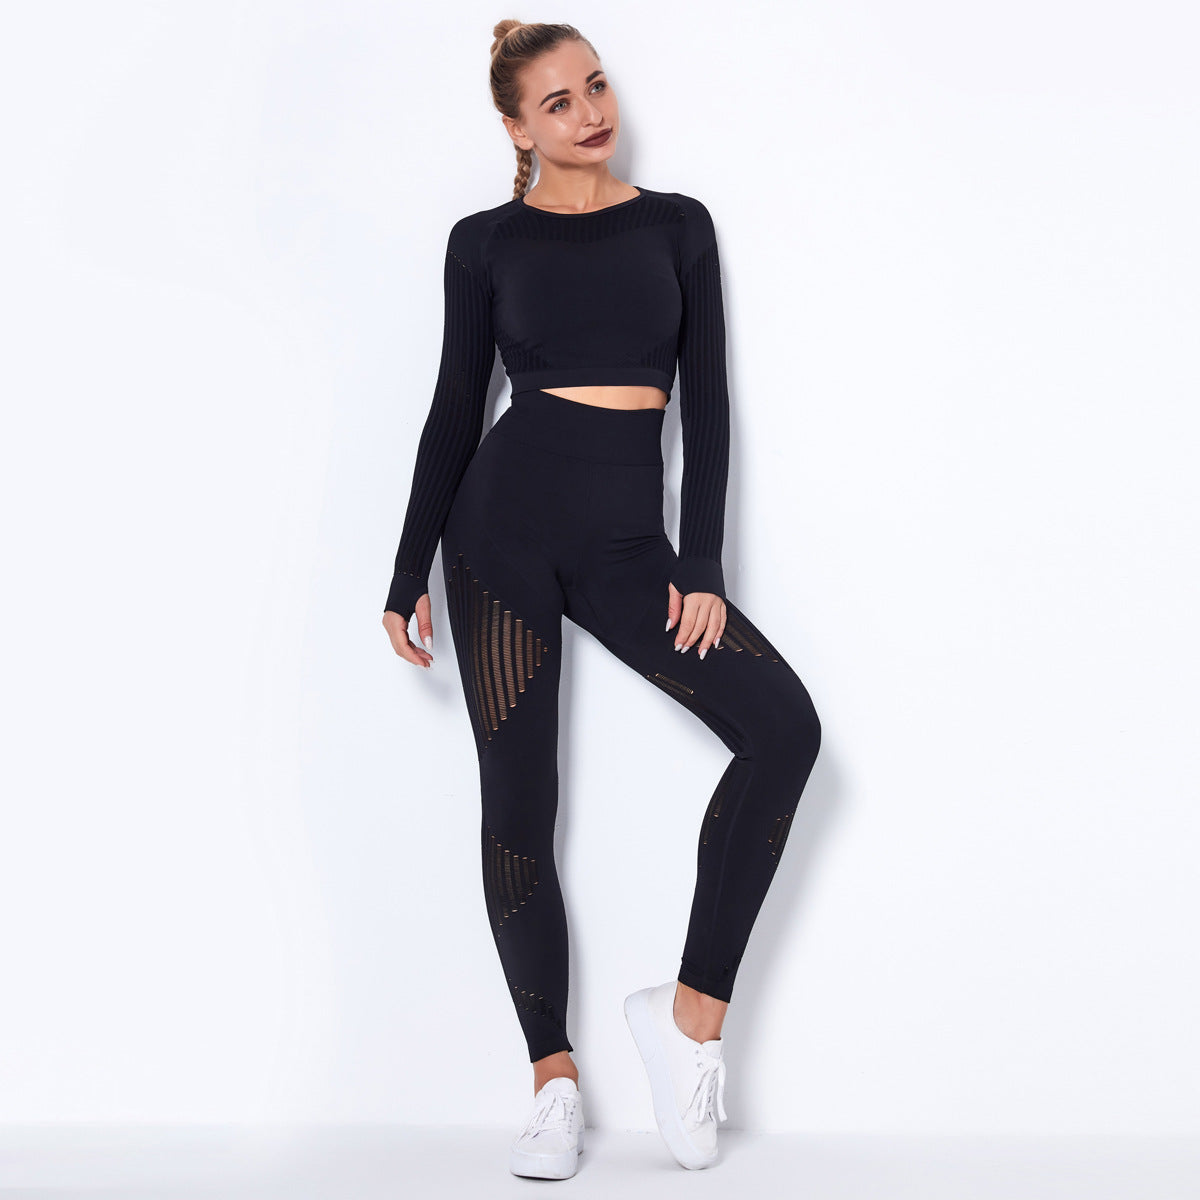 Sexy Hollow Out Long Sleeves Tops and Leggings Sets for Yoga Sporting-Activewear-Black-XS-Free Shipping Leatheretro